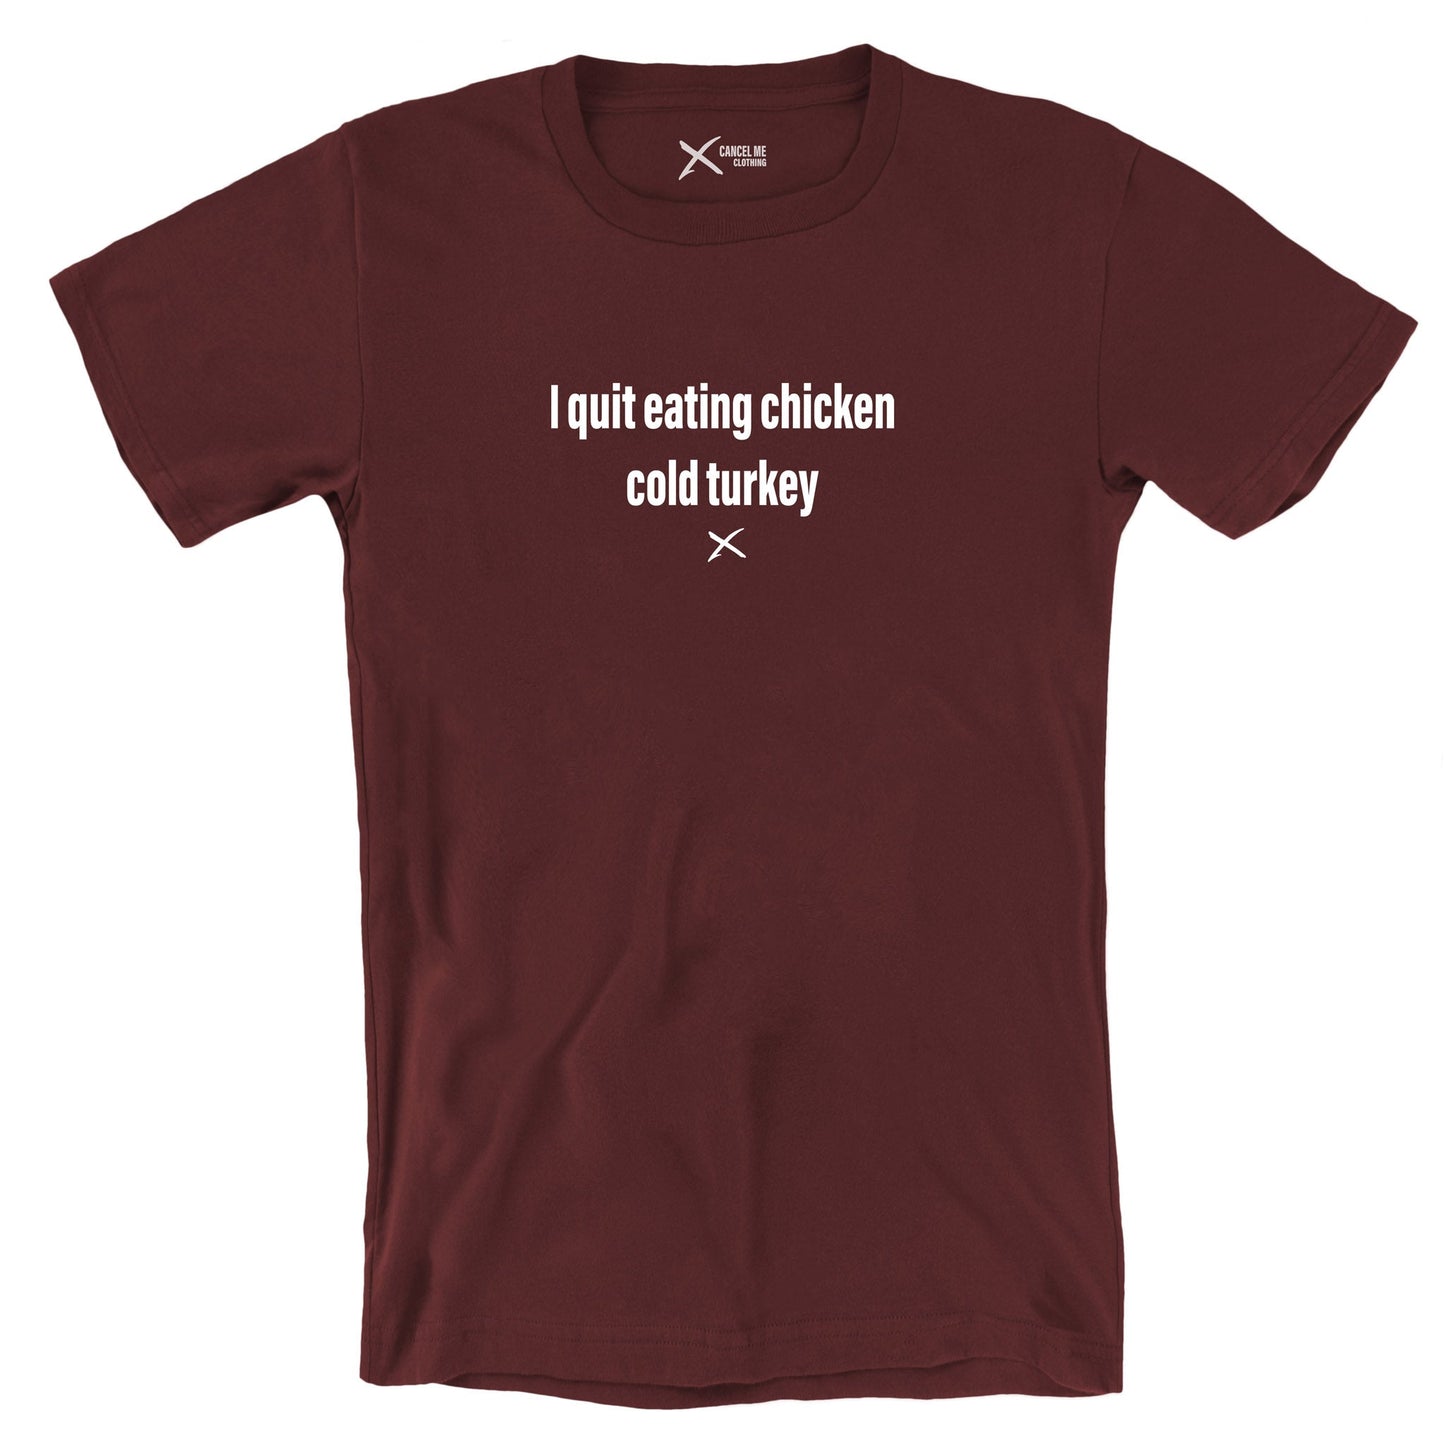 I quit eating chicken cold turkey - Shirt